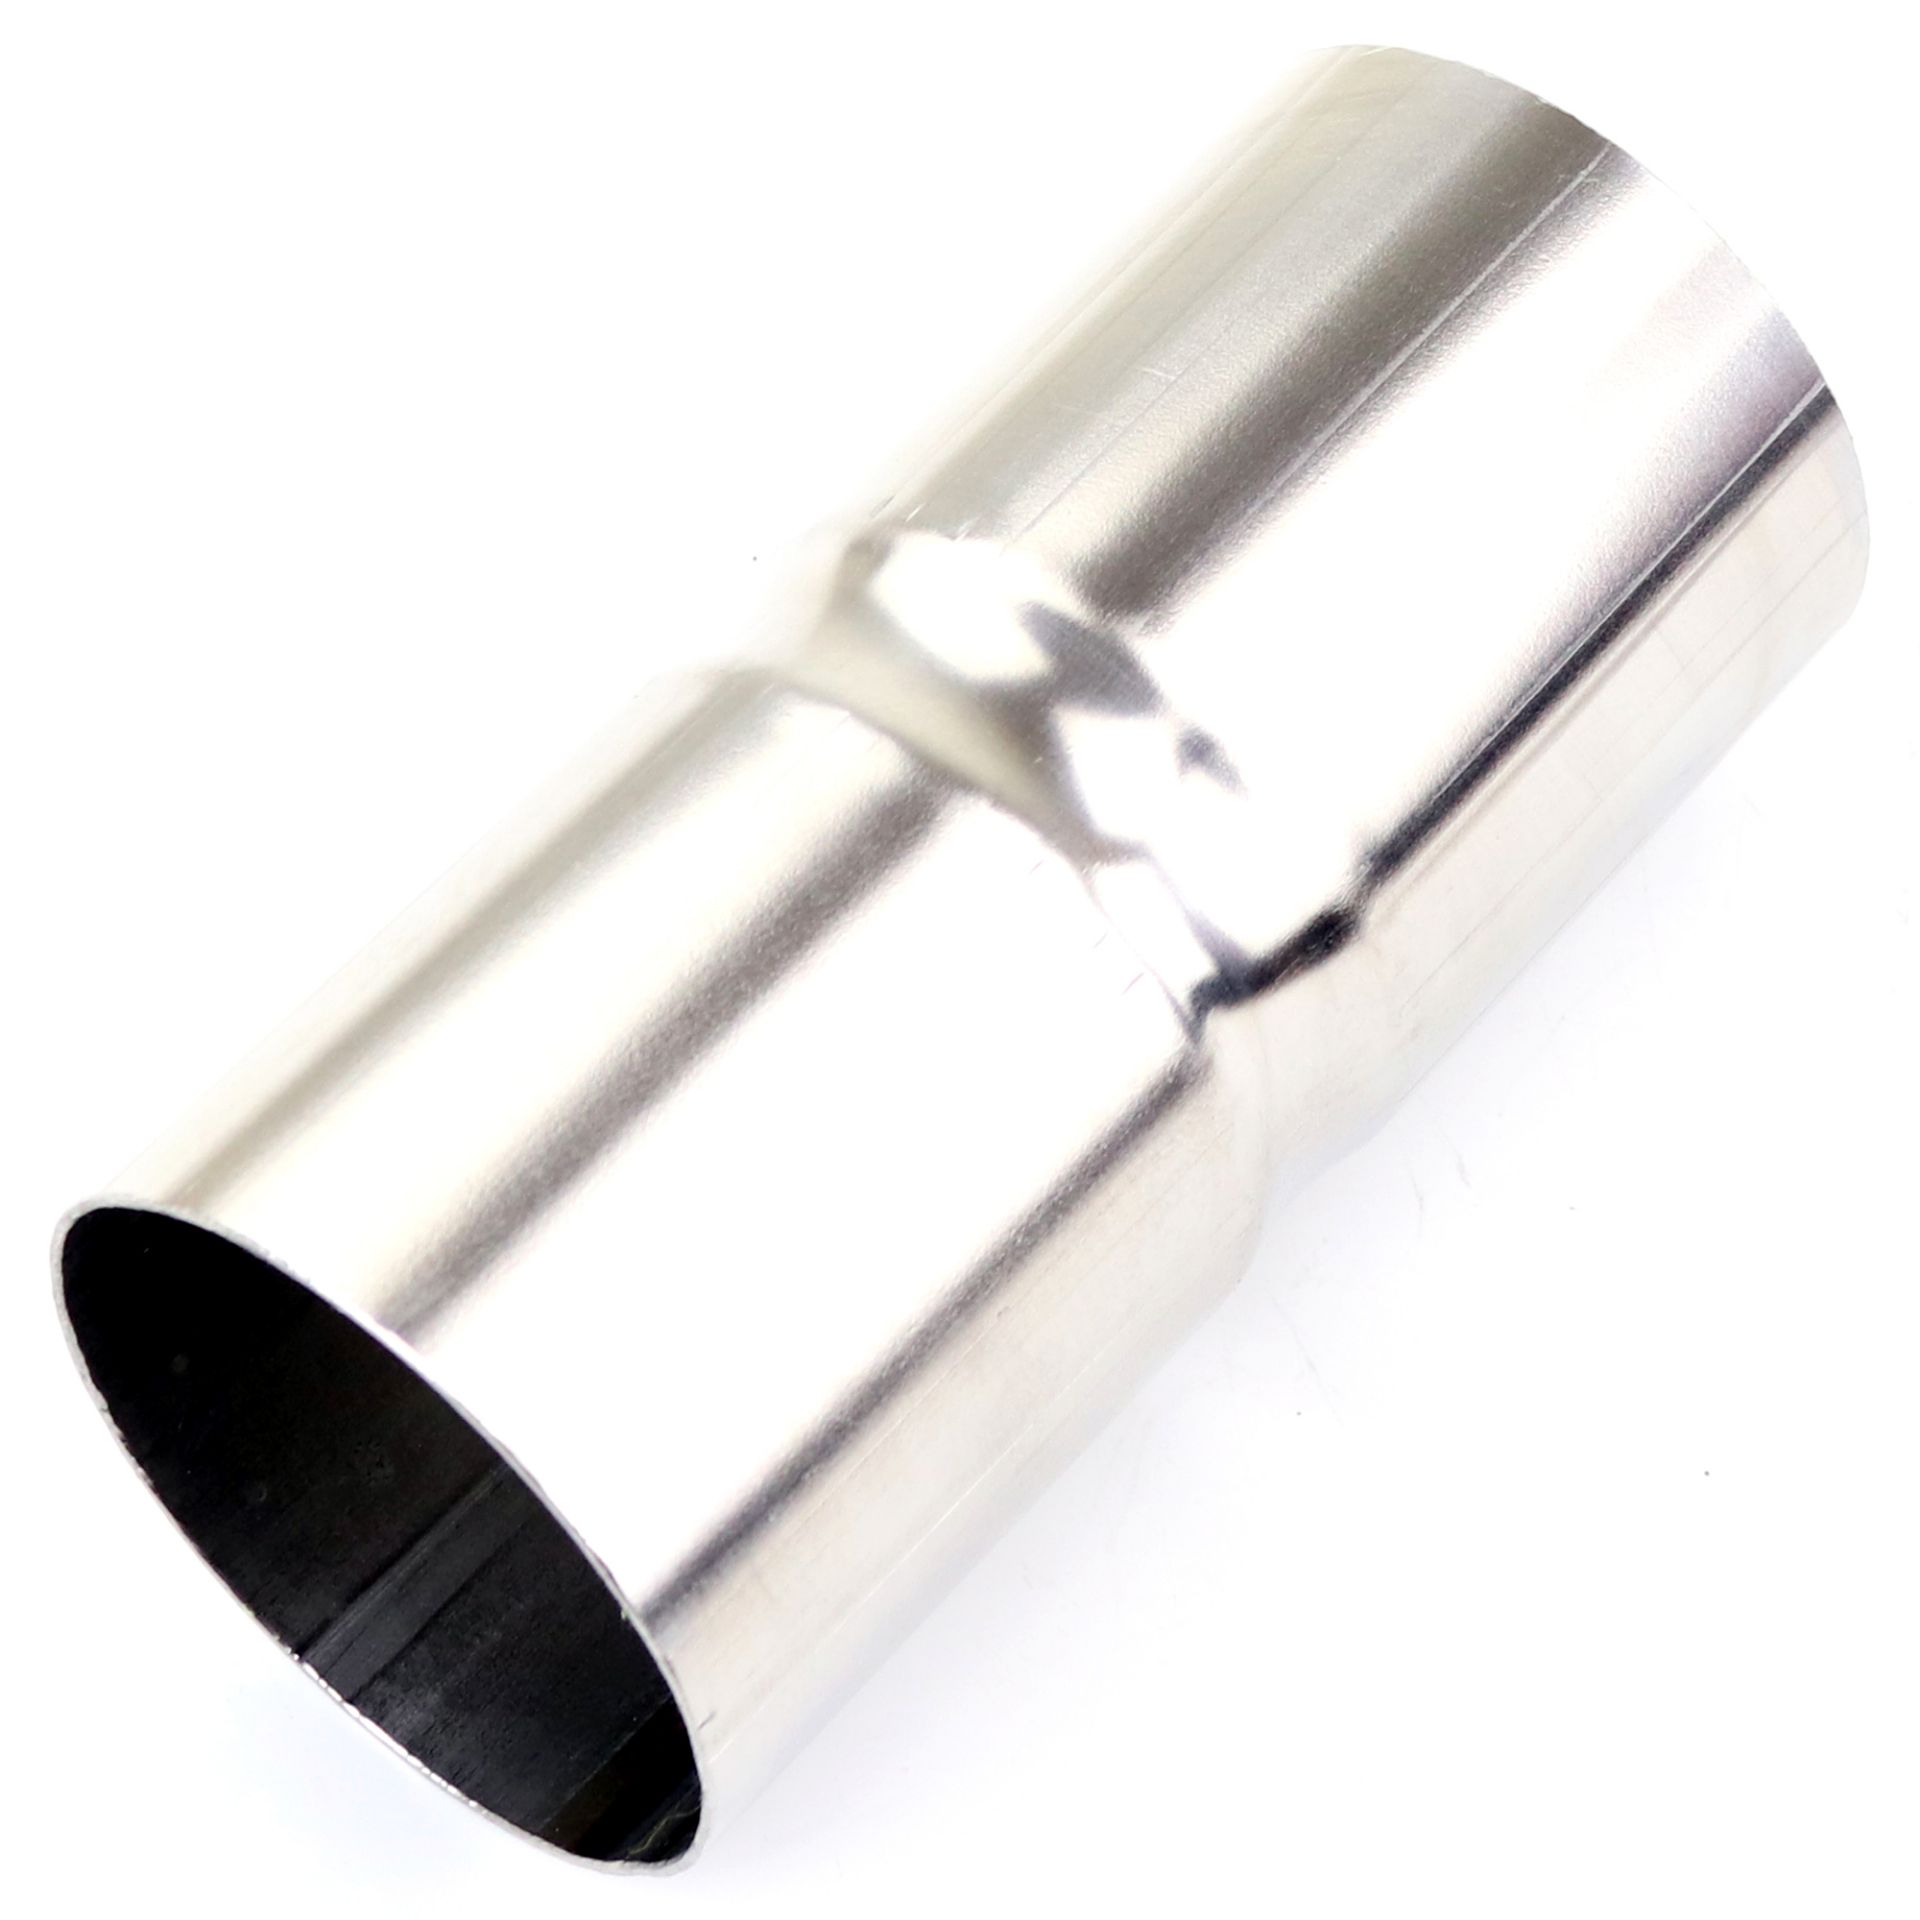 Exhaust Adapter Connector 2 ID to 2.5 ID A-KARCK Exhaust Pipe Reducer 4 Overall Length 304 Stainless Steel 